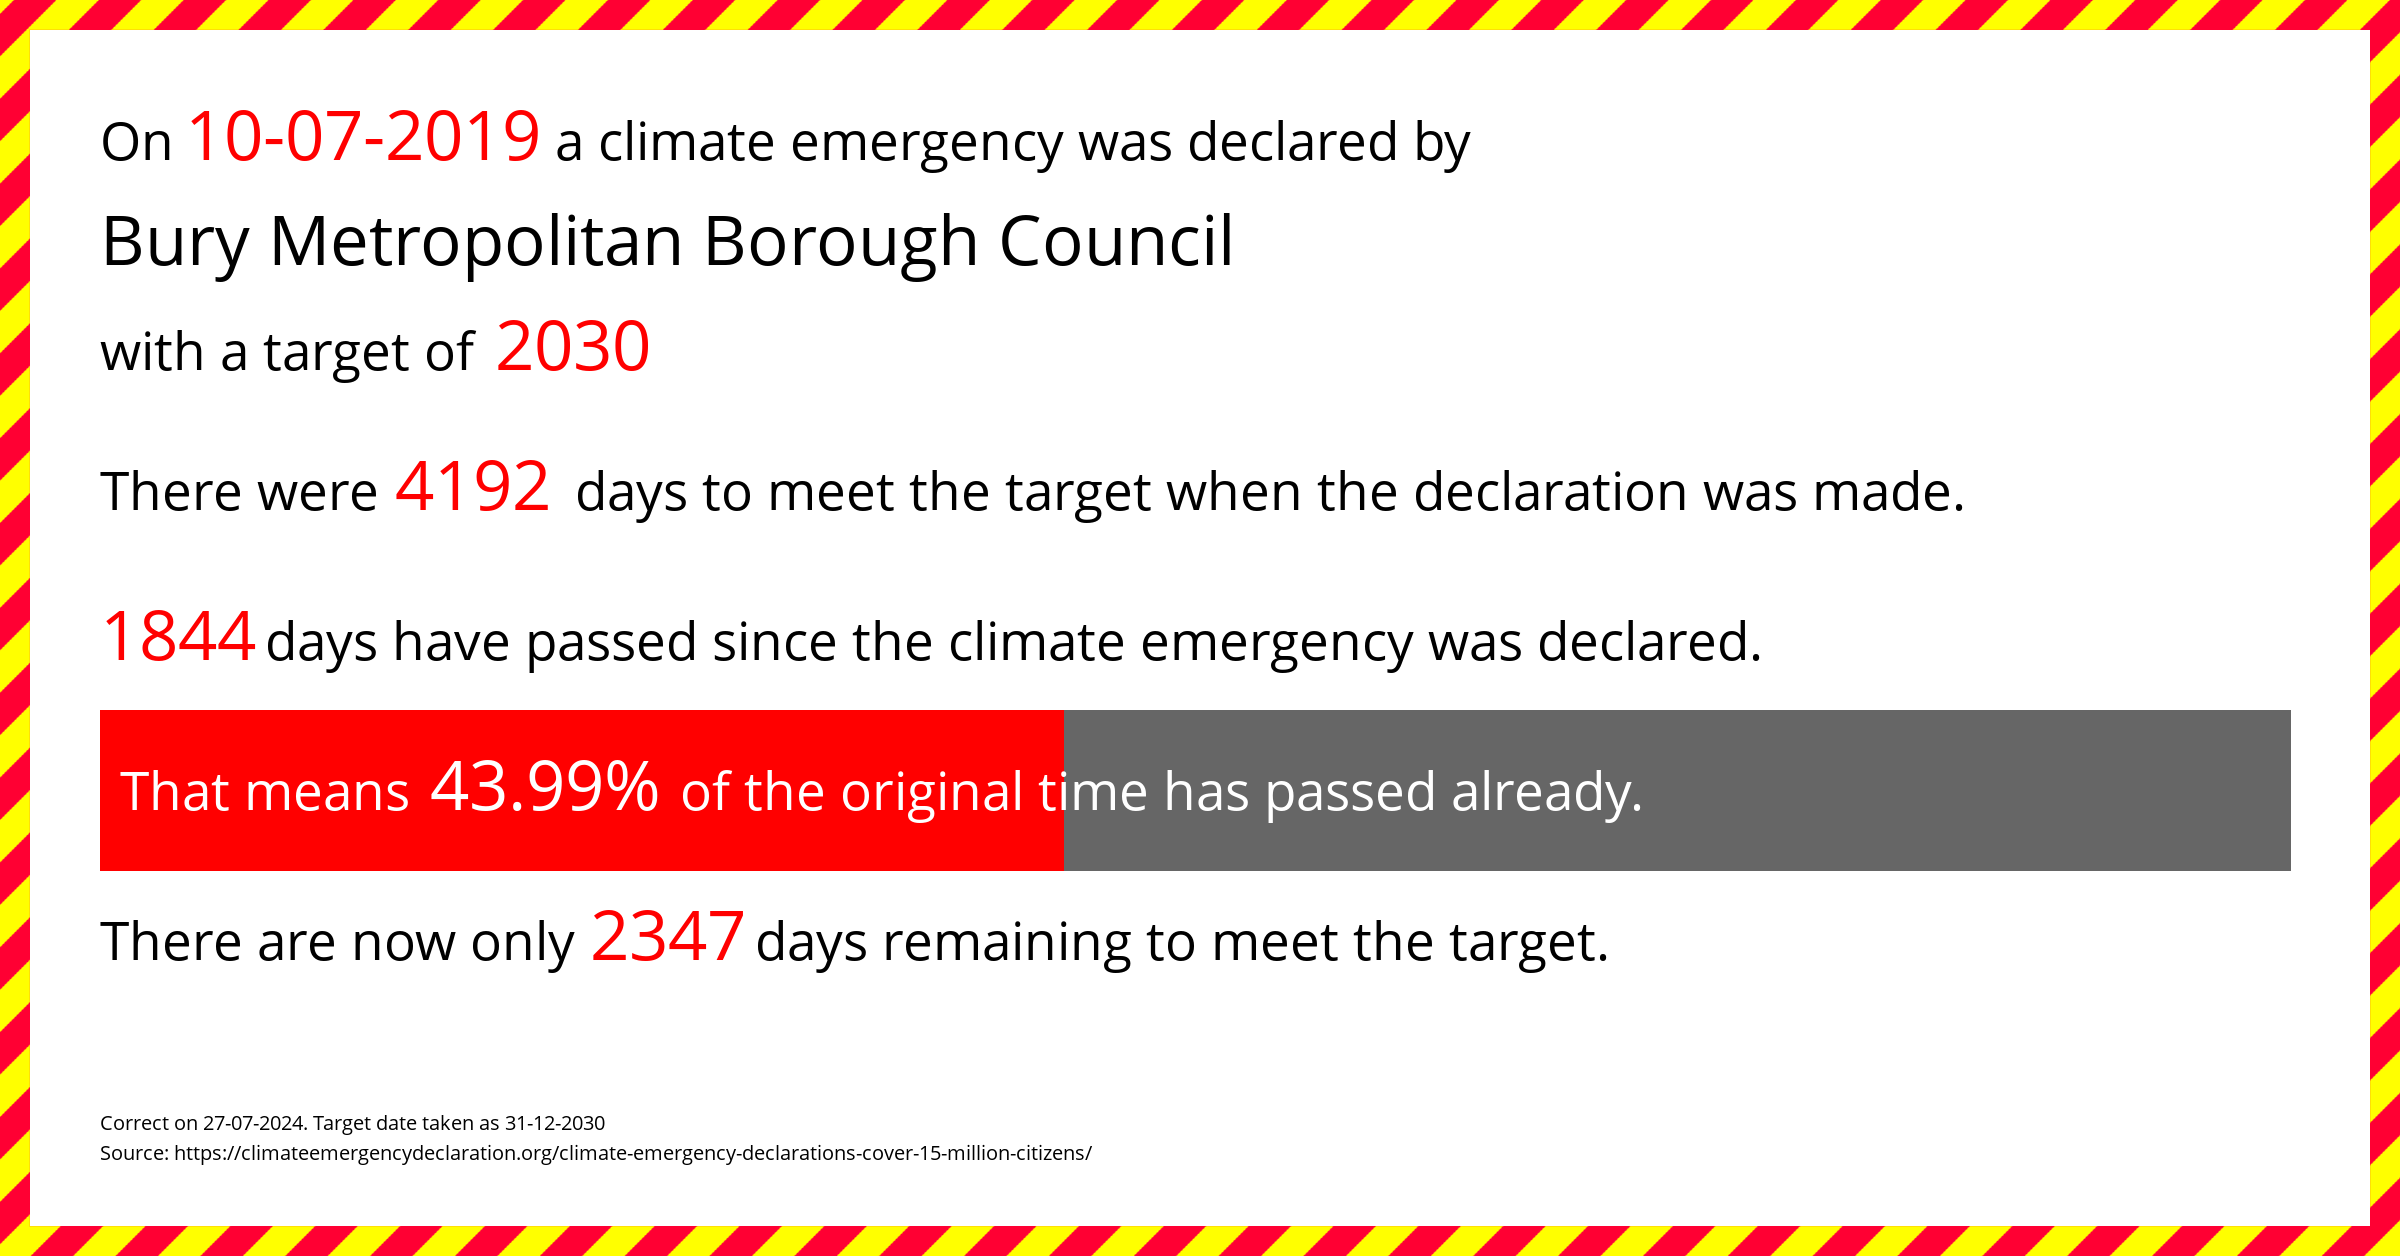 Bury Metropolitan Borough Council declared a Climate emergency on Wednesday 10th July 2019, with a target of 2030.